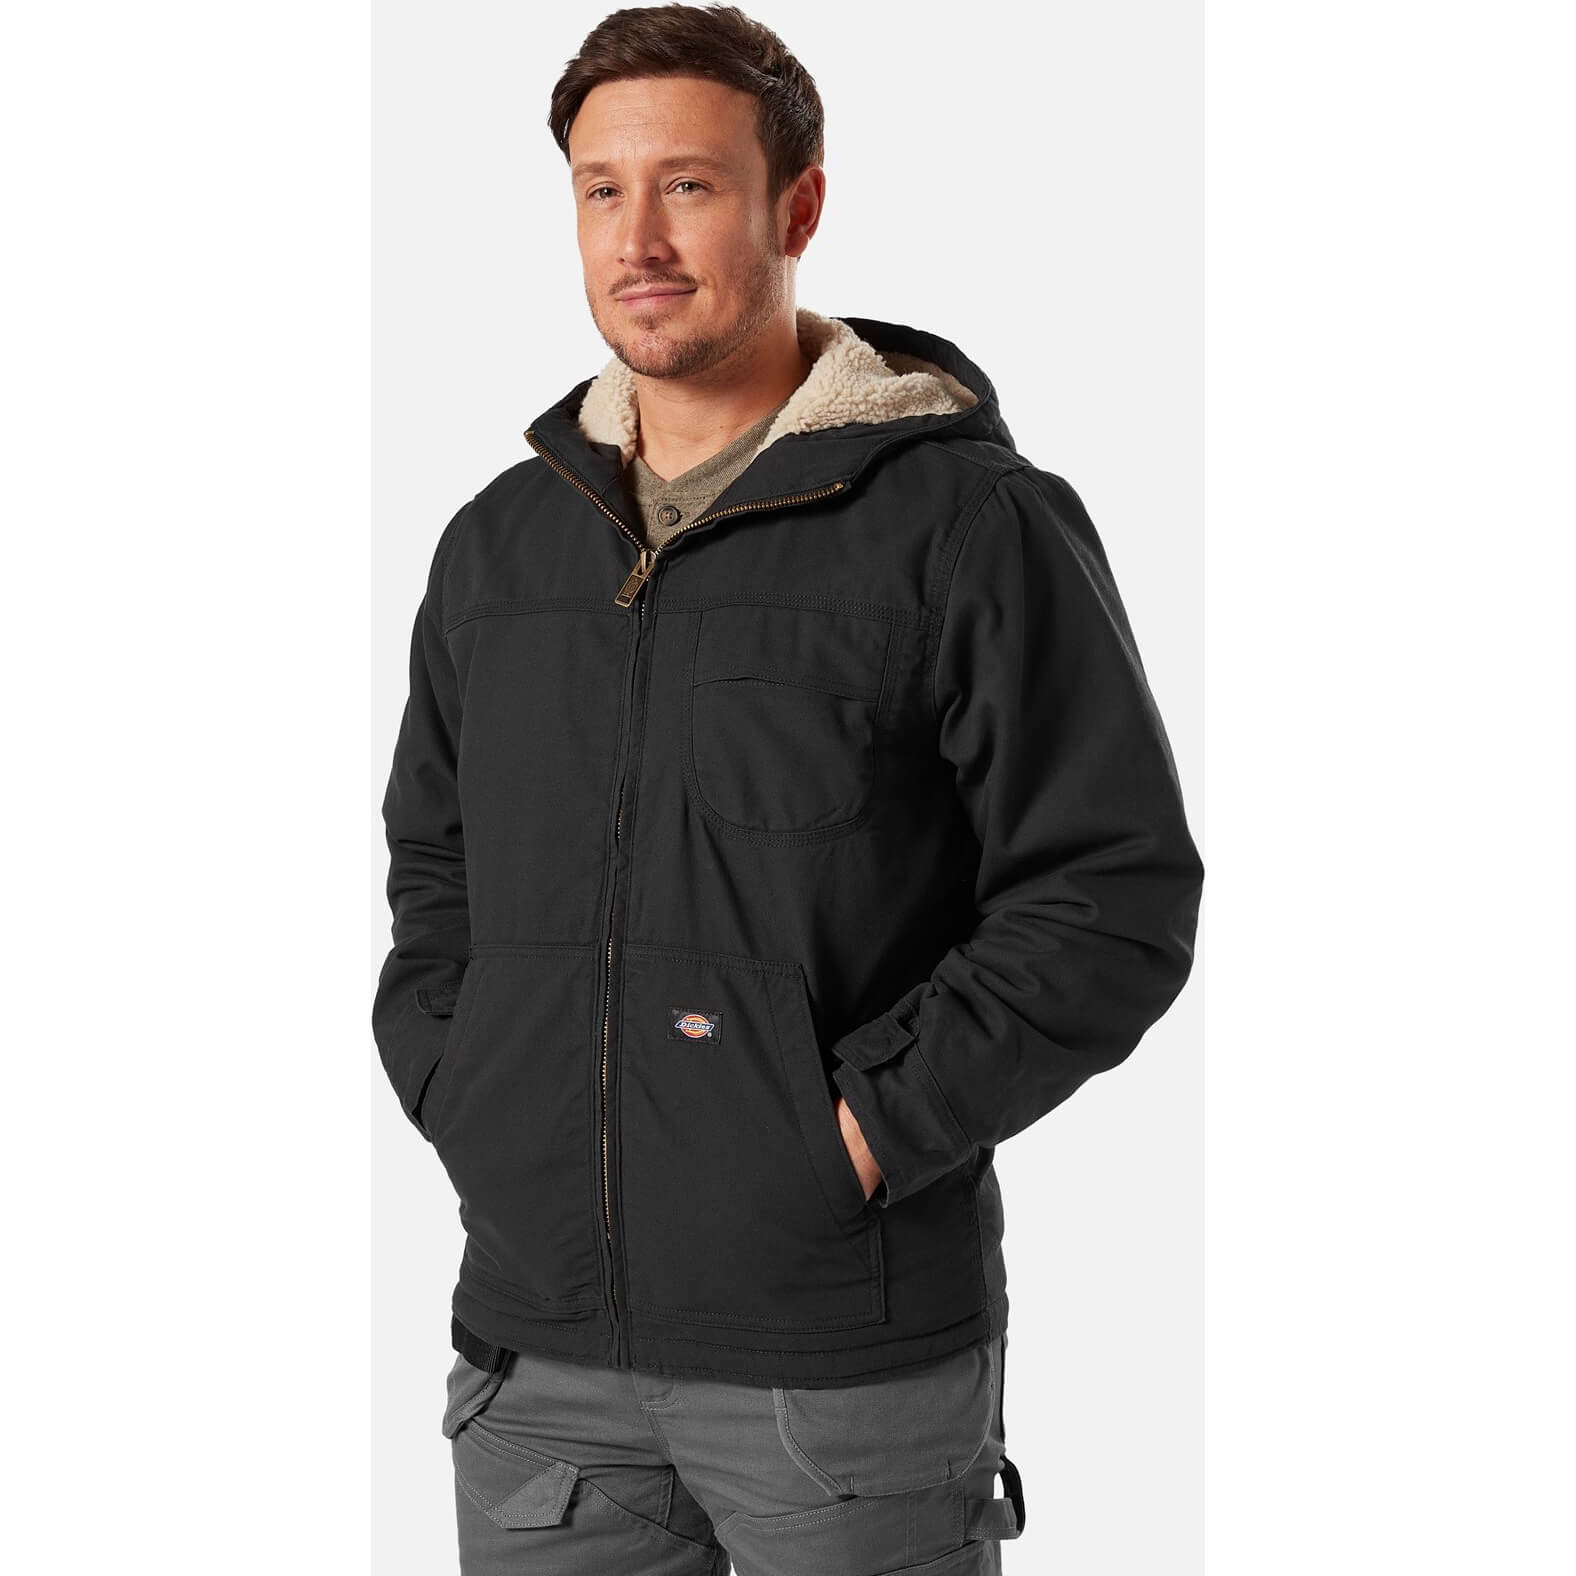 Image of Dickies Sherpa Lined Duck Jacket Black L